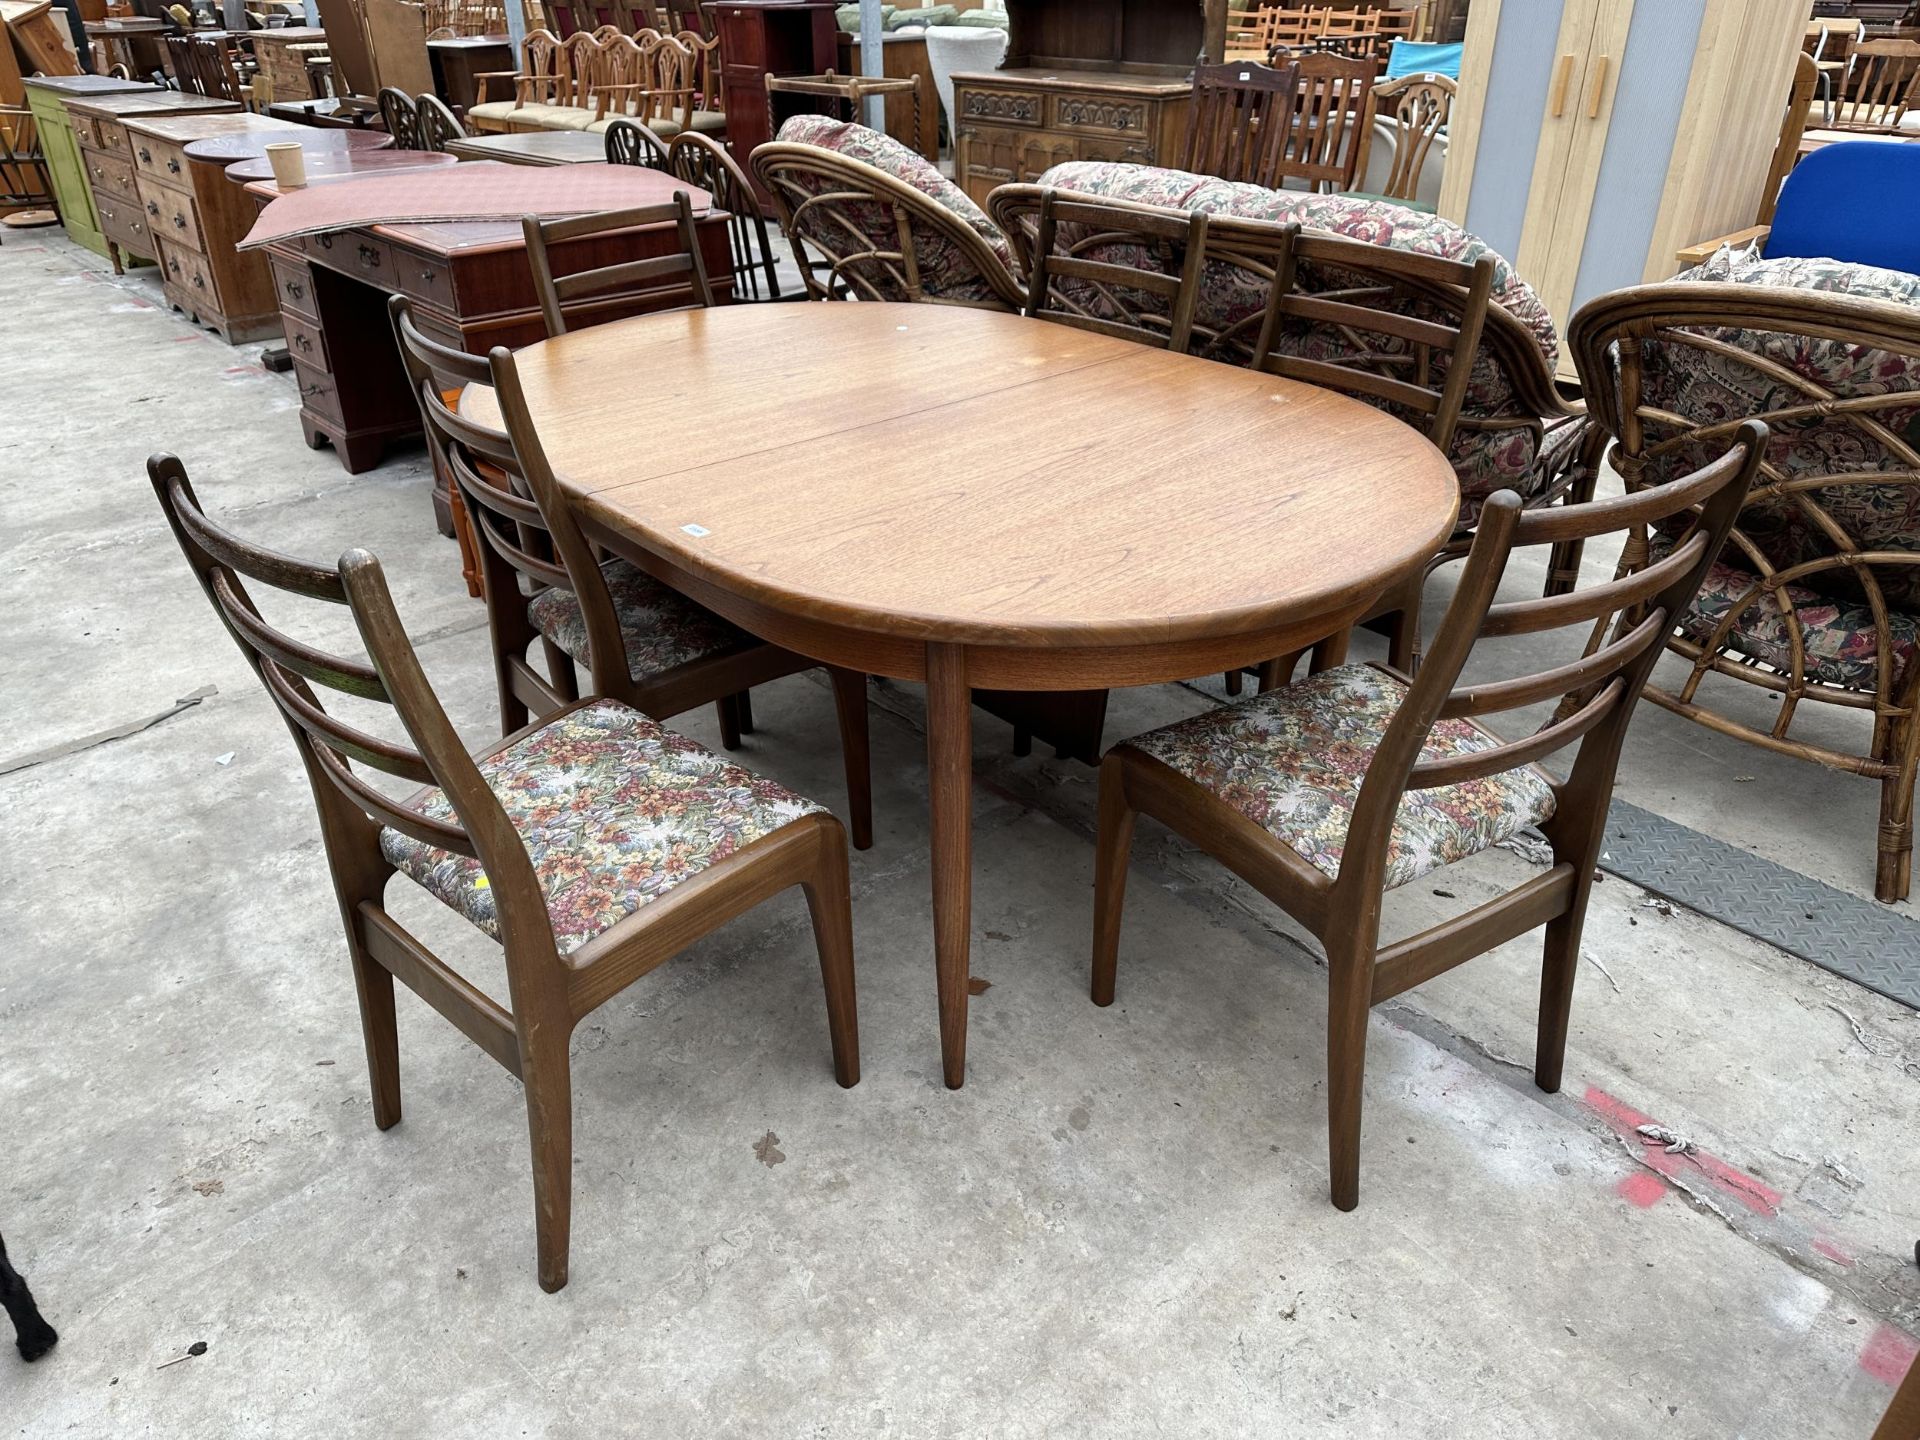 A G-PLAN RETRO TEAK EXTENDING DINING TABLE, 64 X 44" (LEAF 18") AND SIX LADDERBACK DINING CHAIRS